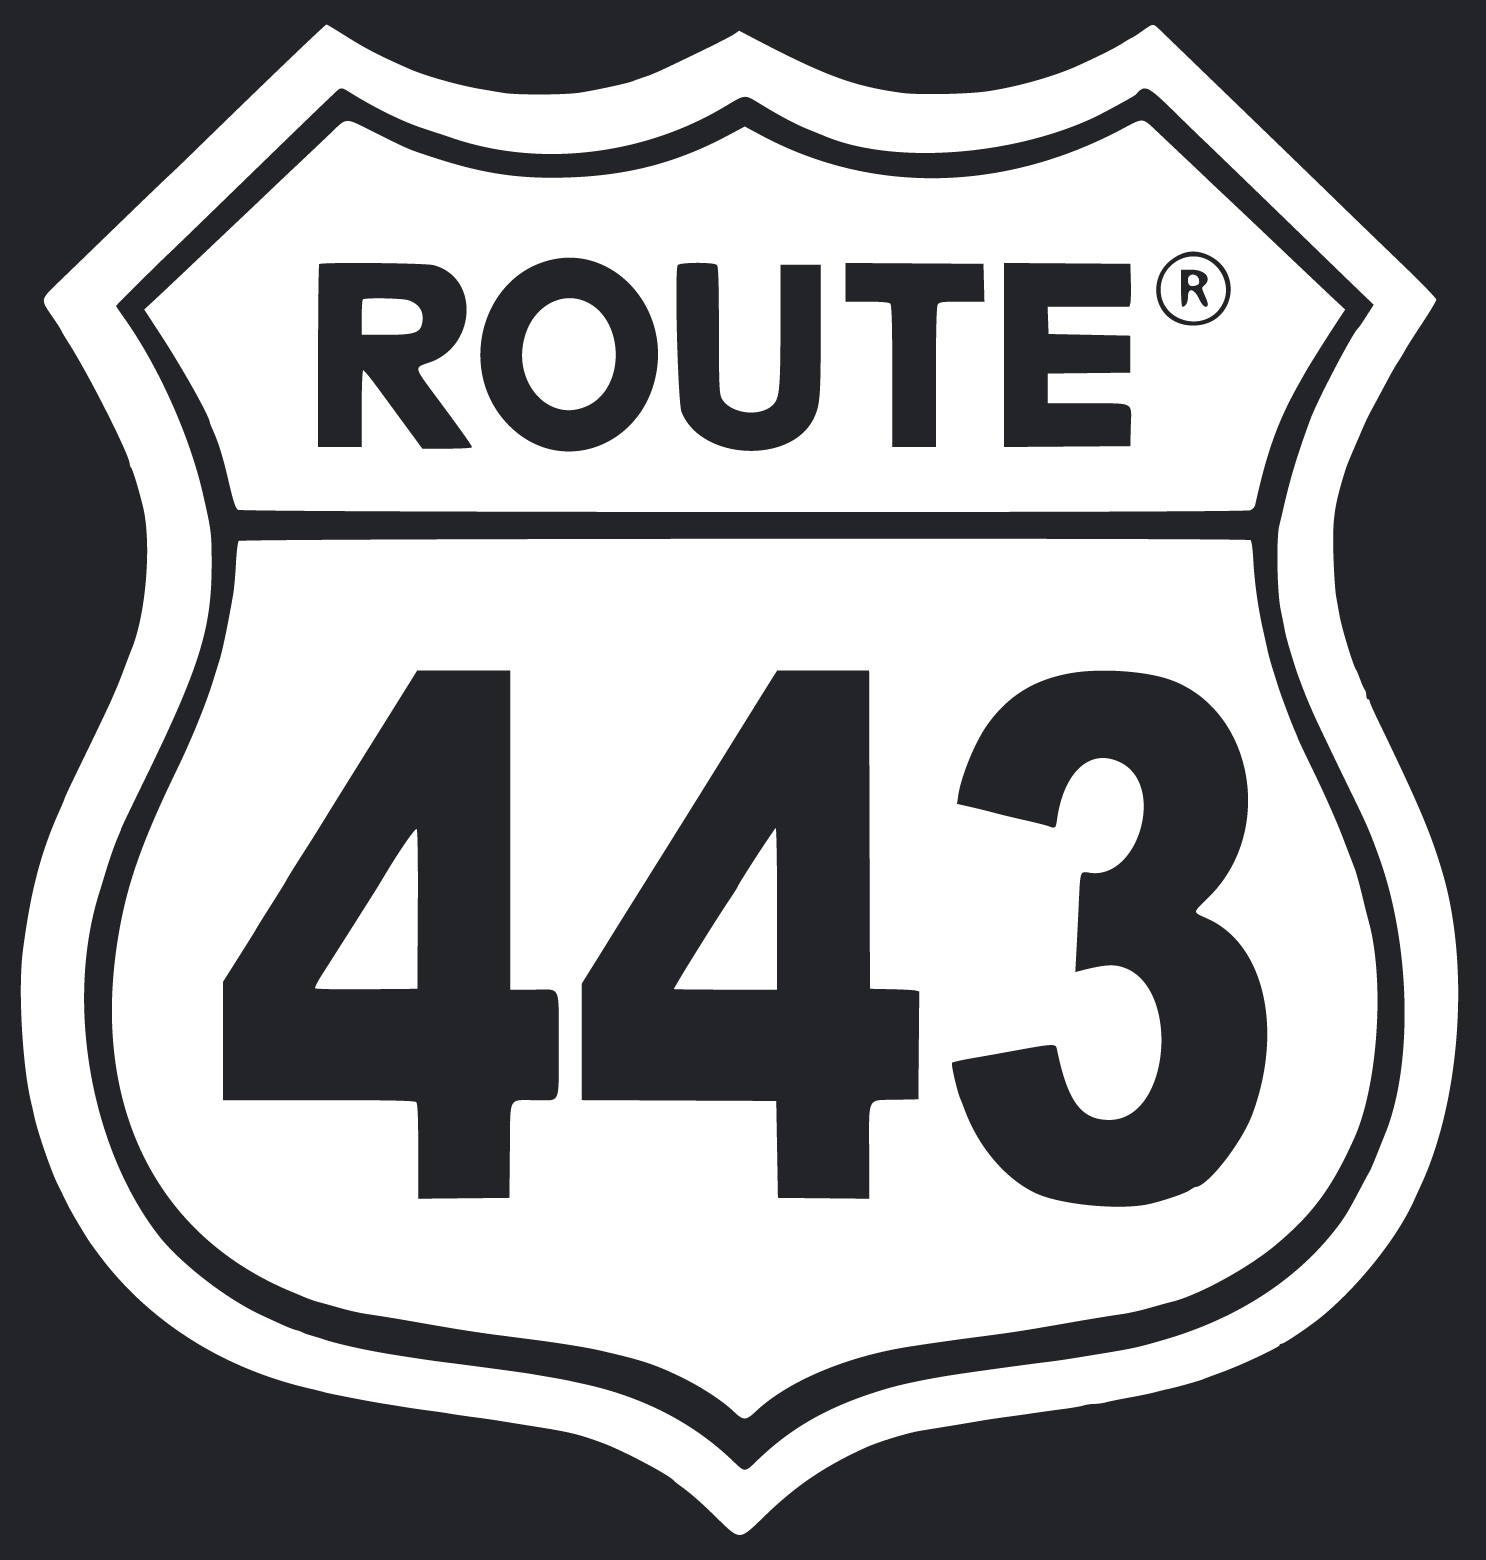 Route443